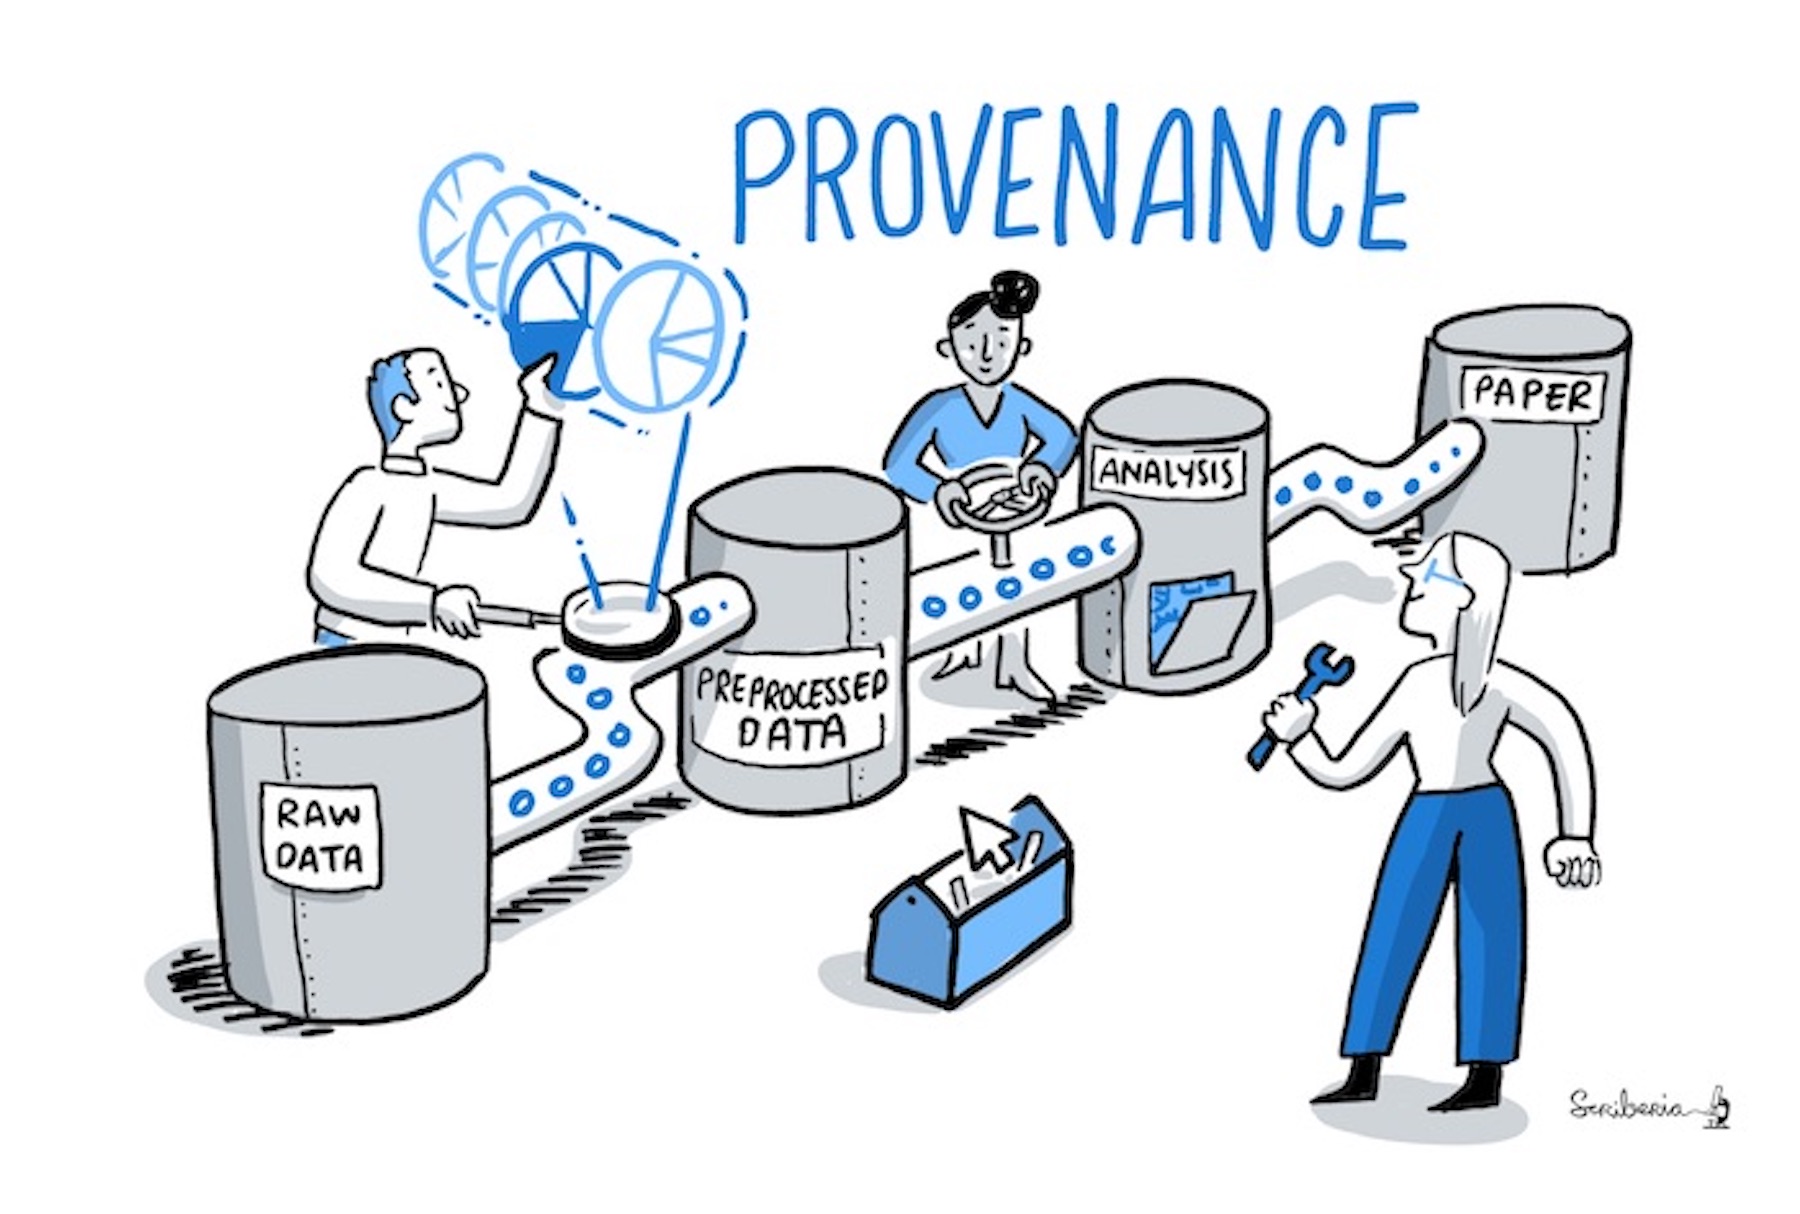 A figure explaining the concept of provenance: Silos labeled raw data, preprocessed data, analysis, and paper are connected and points representing data are flowing from the first to the last silo.